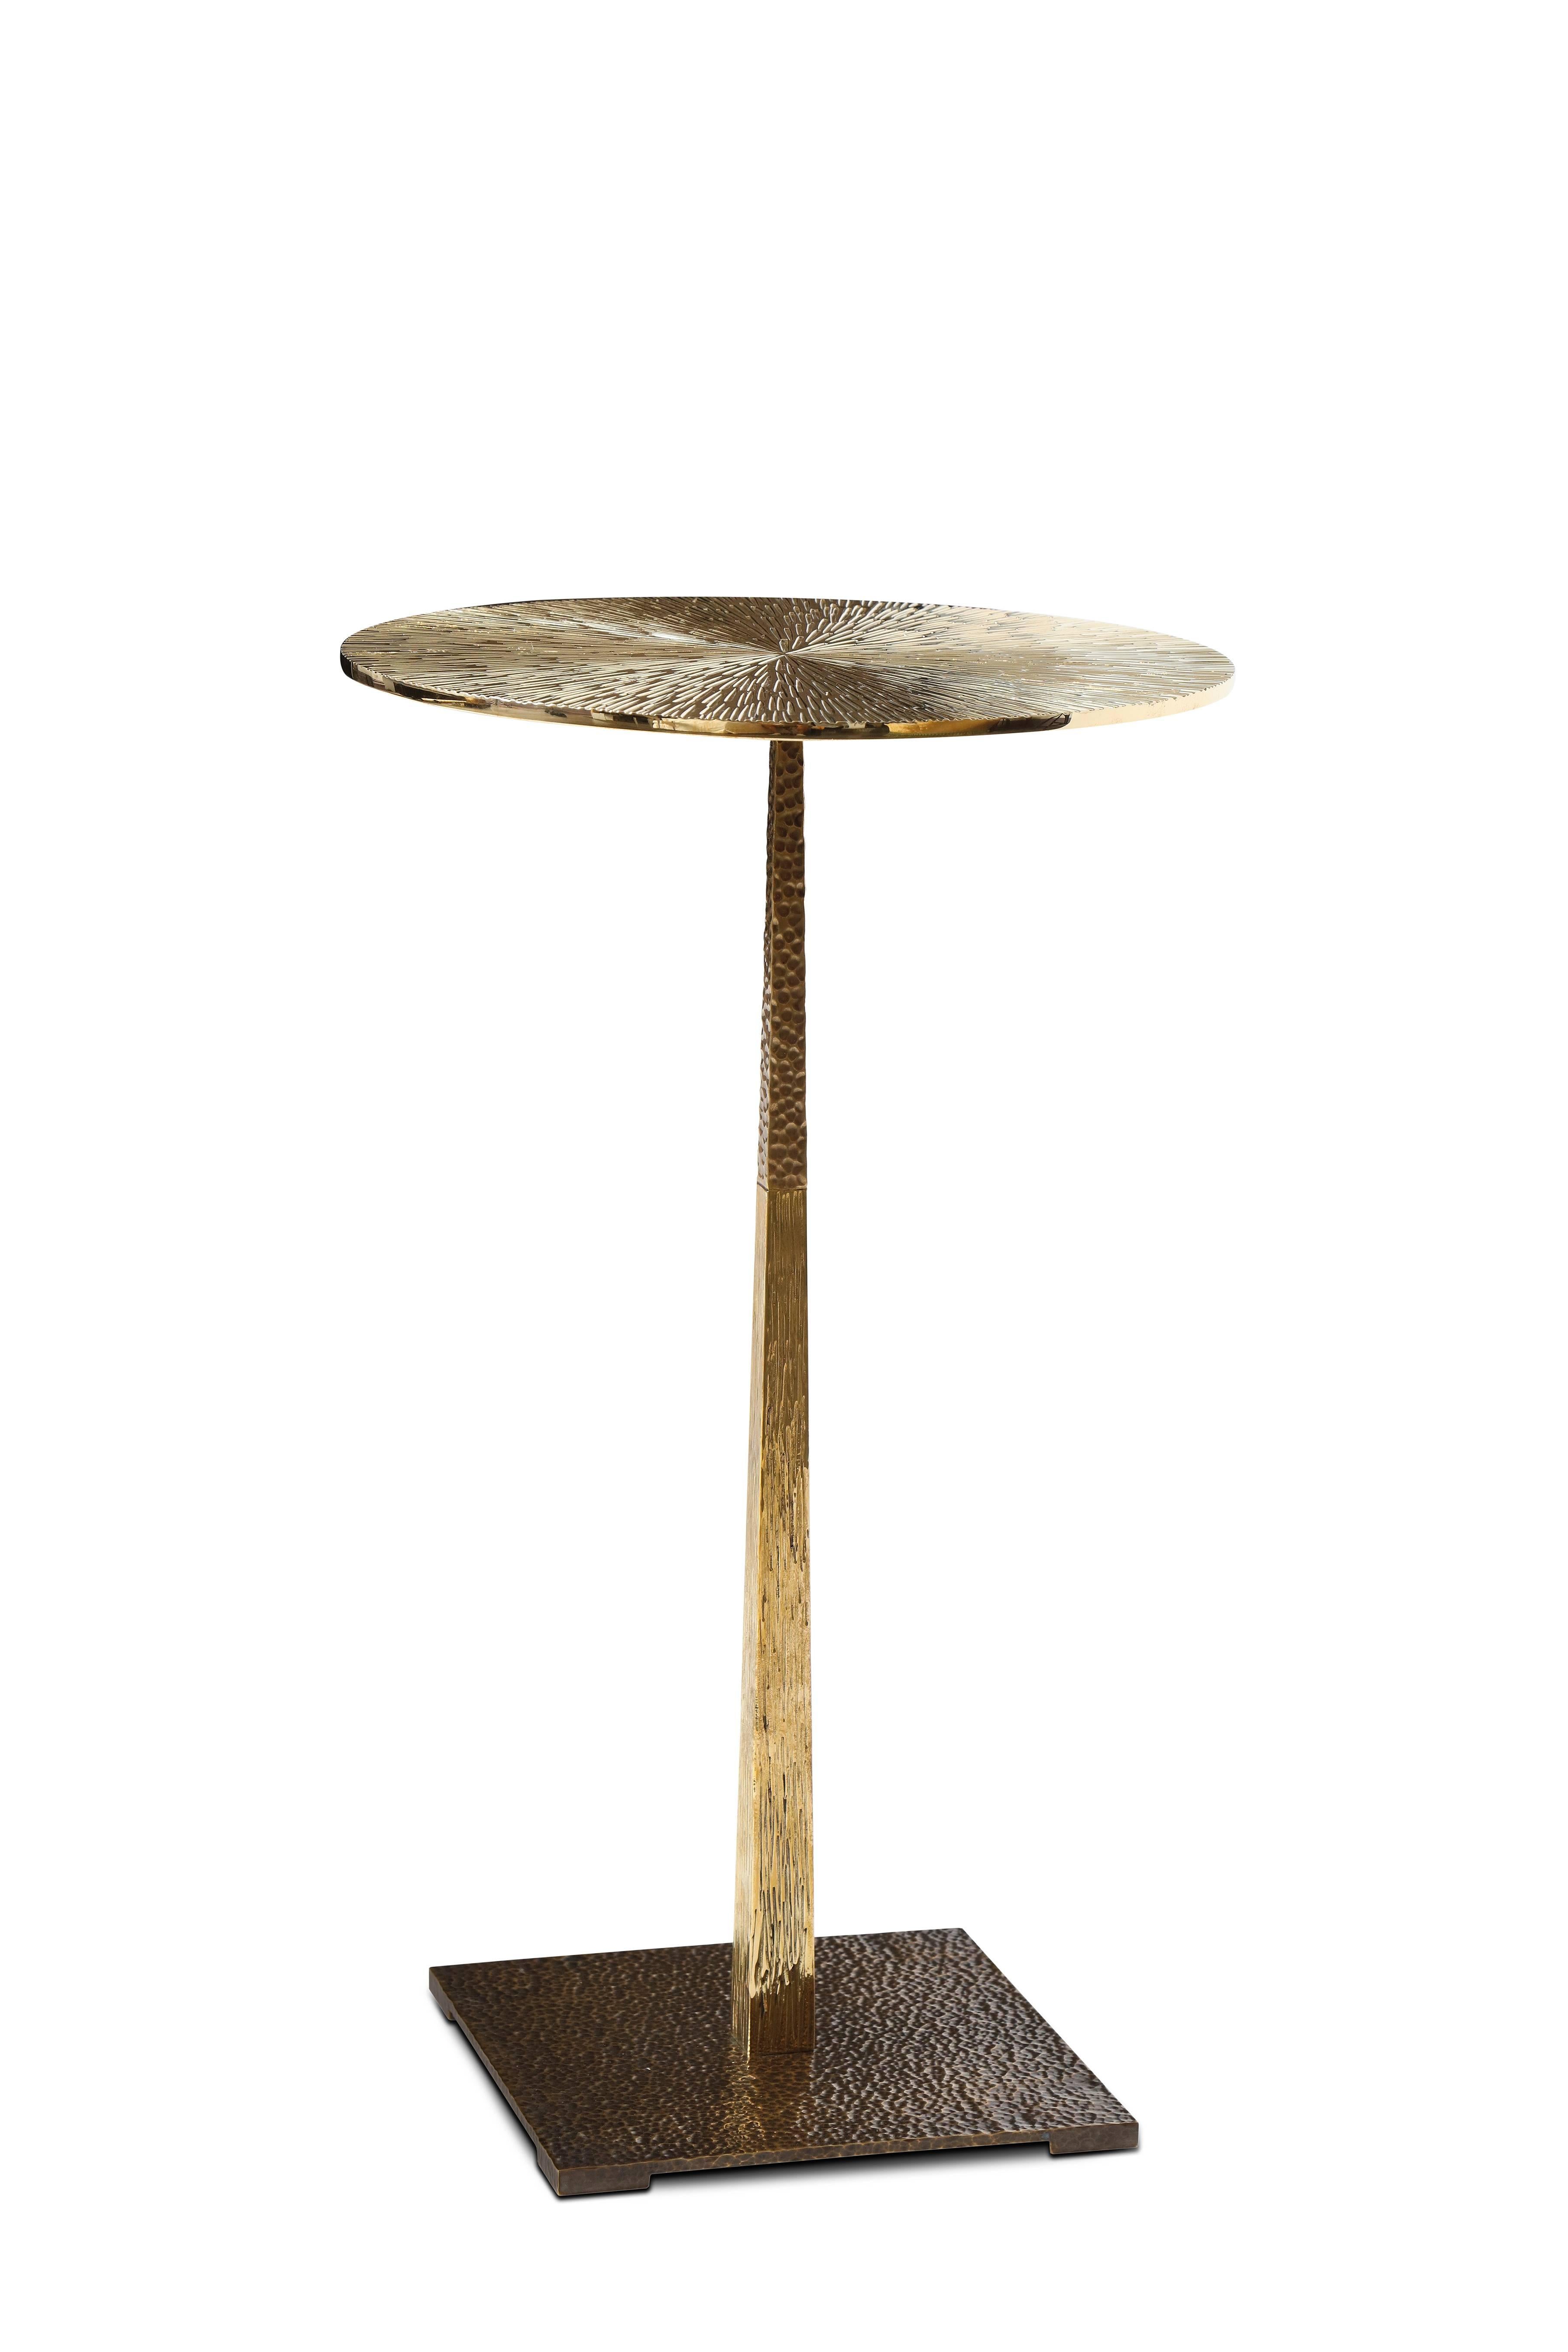 American UPAYA CIRCLE Side Table - Polished and Patinated Bronze - by Studio Gallet 